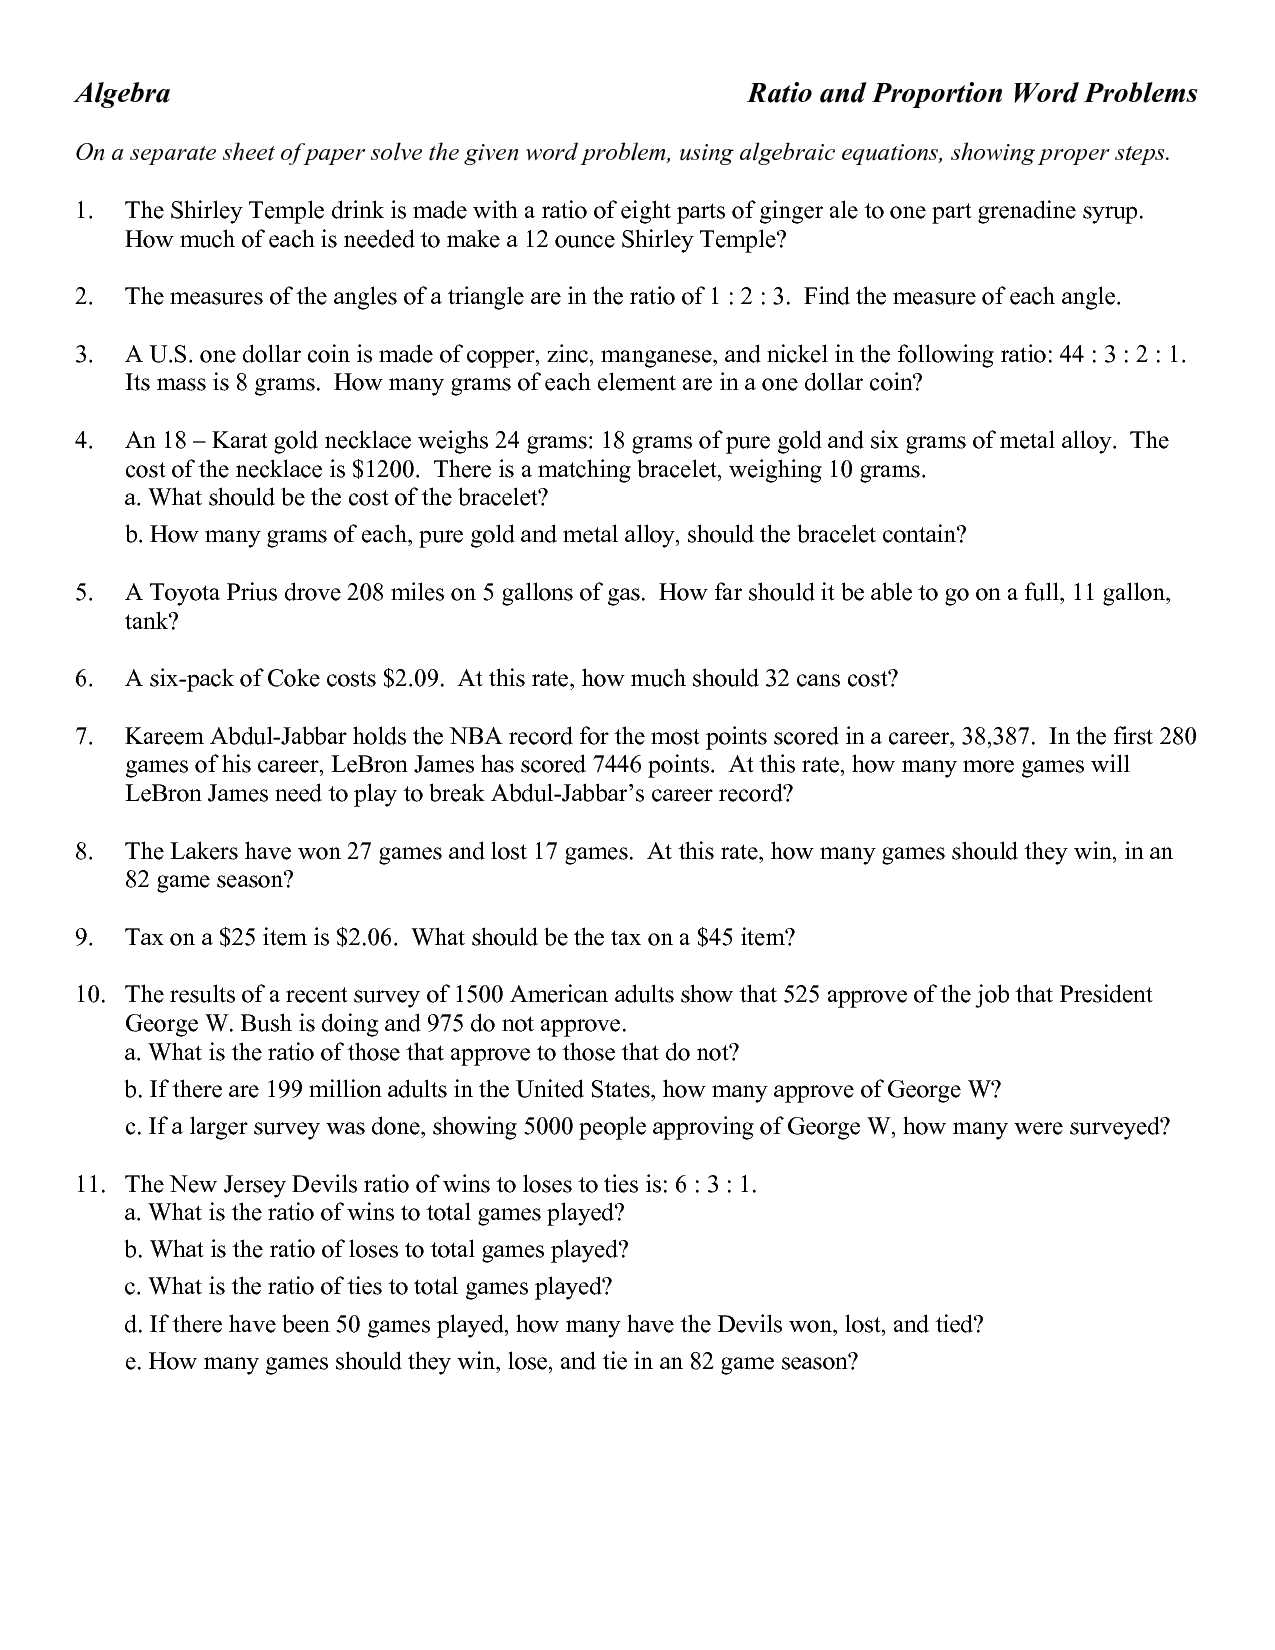 Proportion Word Problems Worksheet 7th Grade Also Collection Of Math Worksheets 6th Grade Proportions